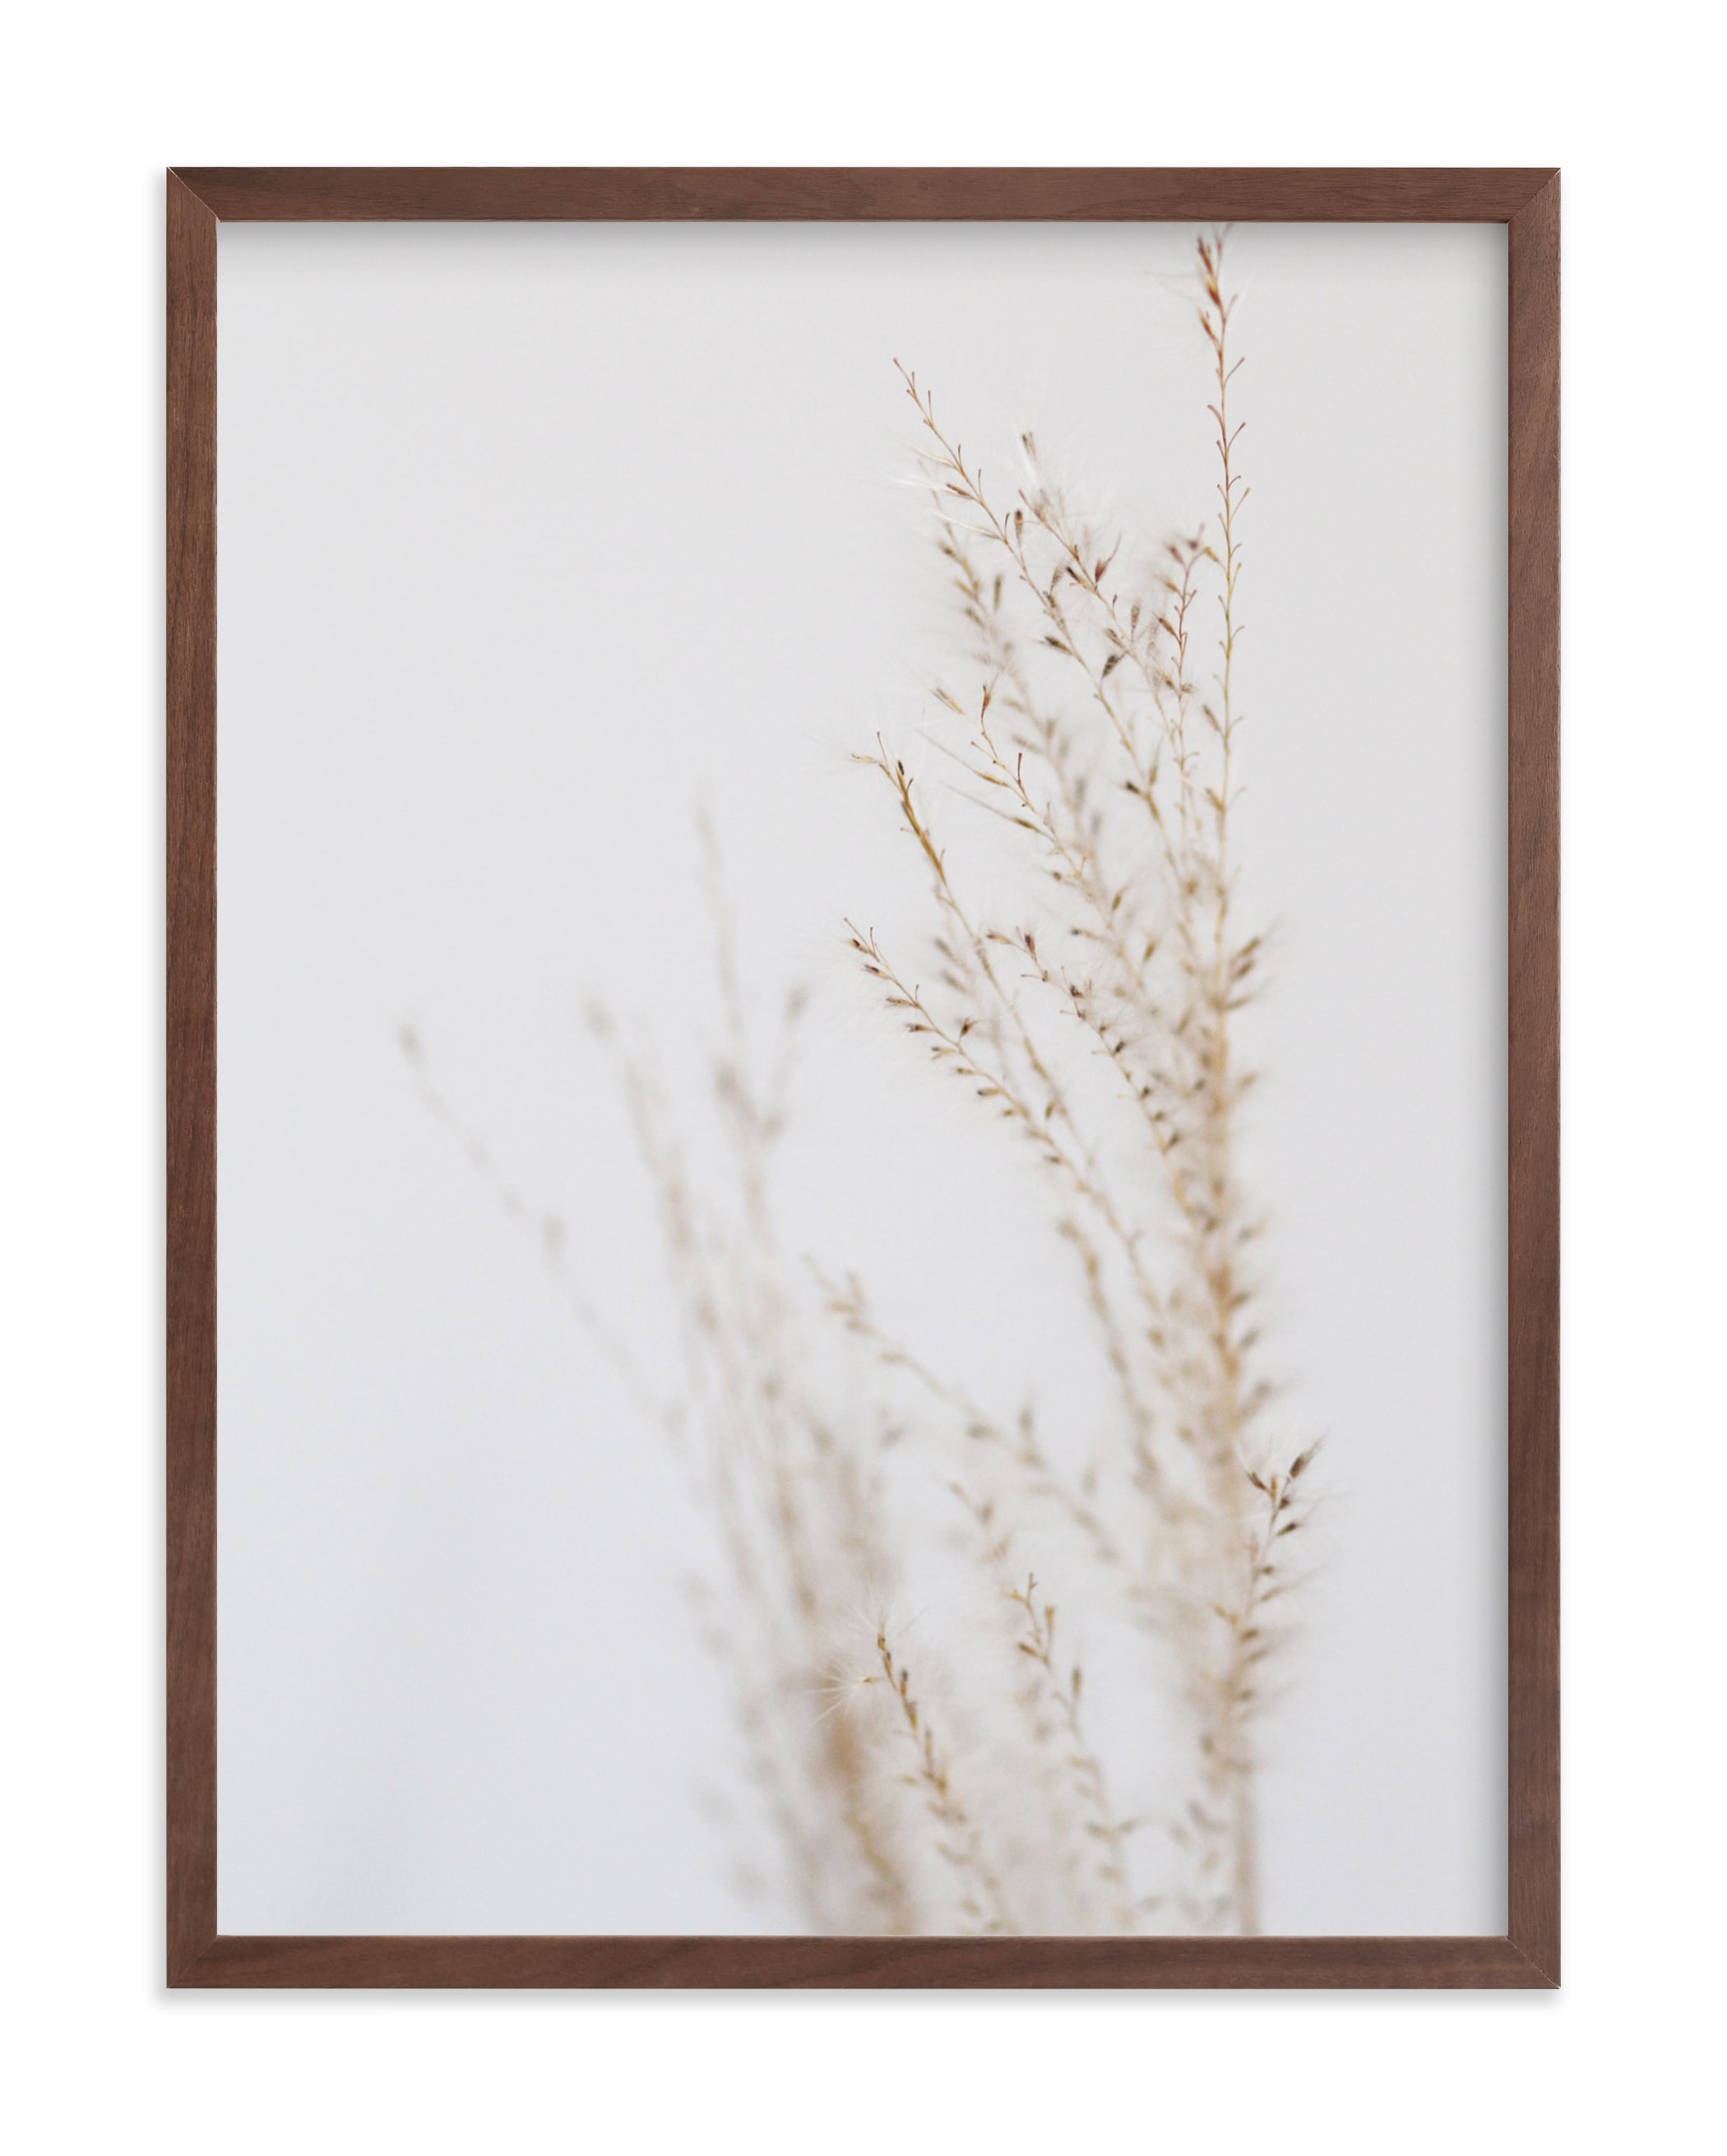 Ghosted Neutrals 3 Limited Edition Fine Art Print - Image 0